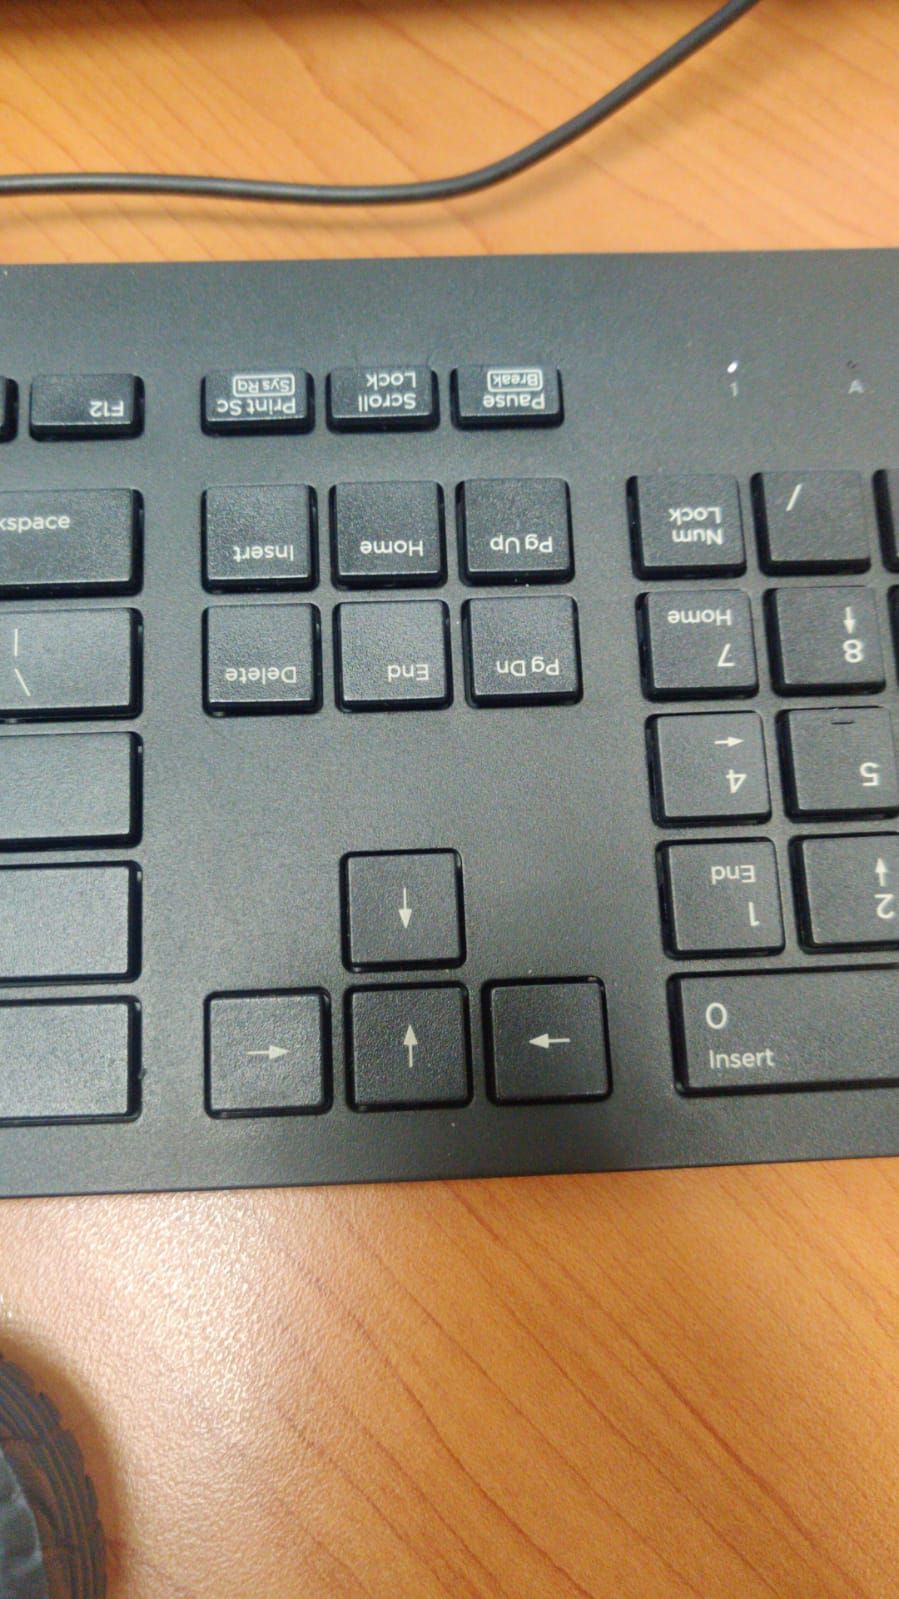 Meanwhile, my Australian friends keyboard at work